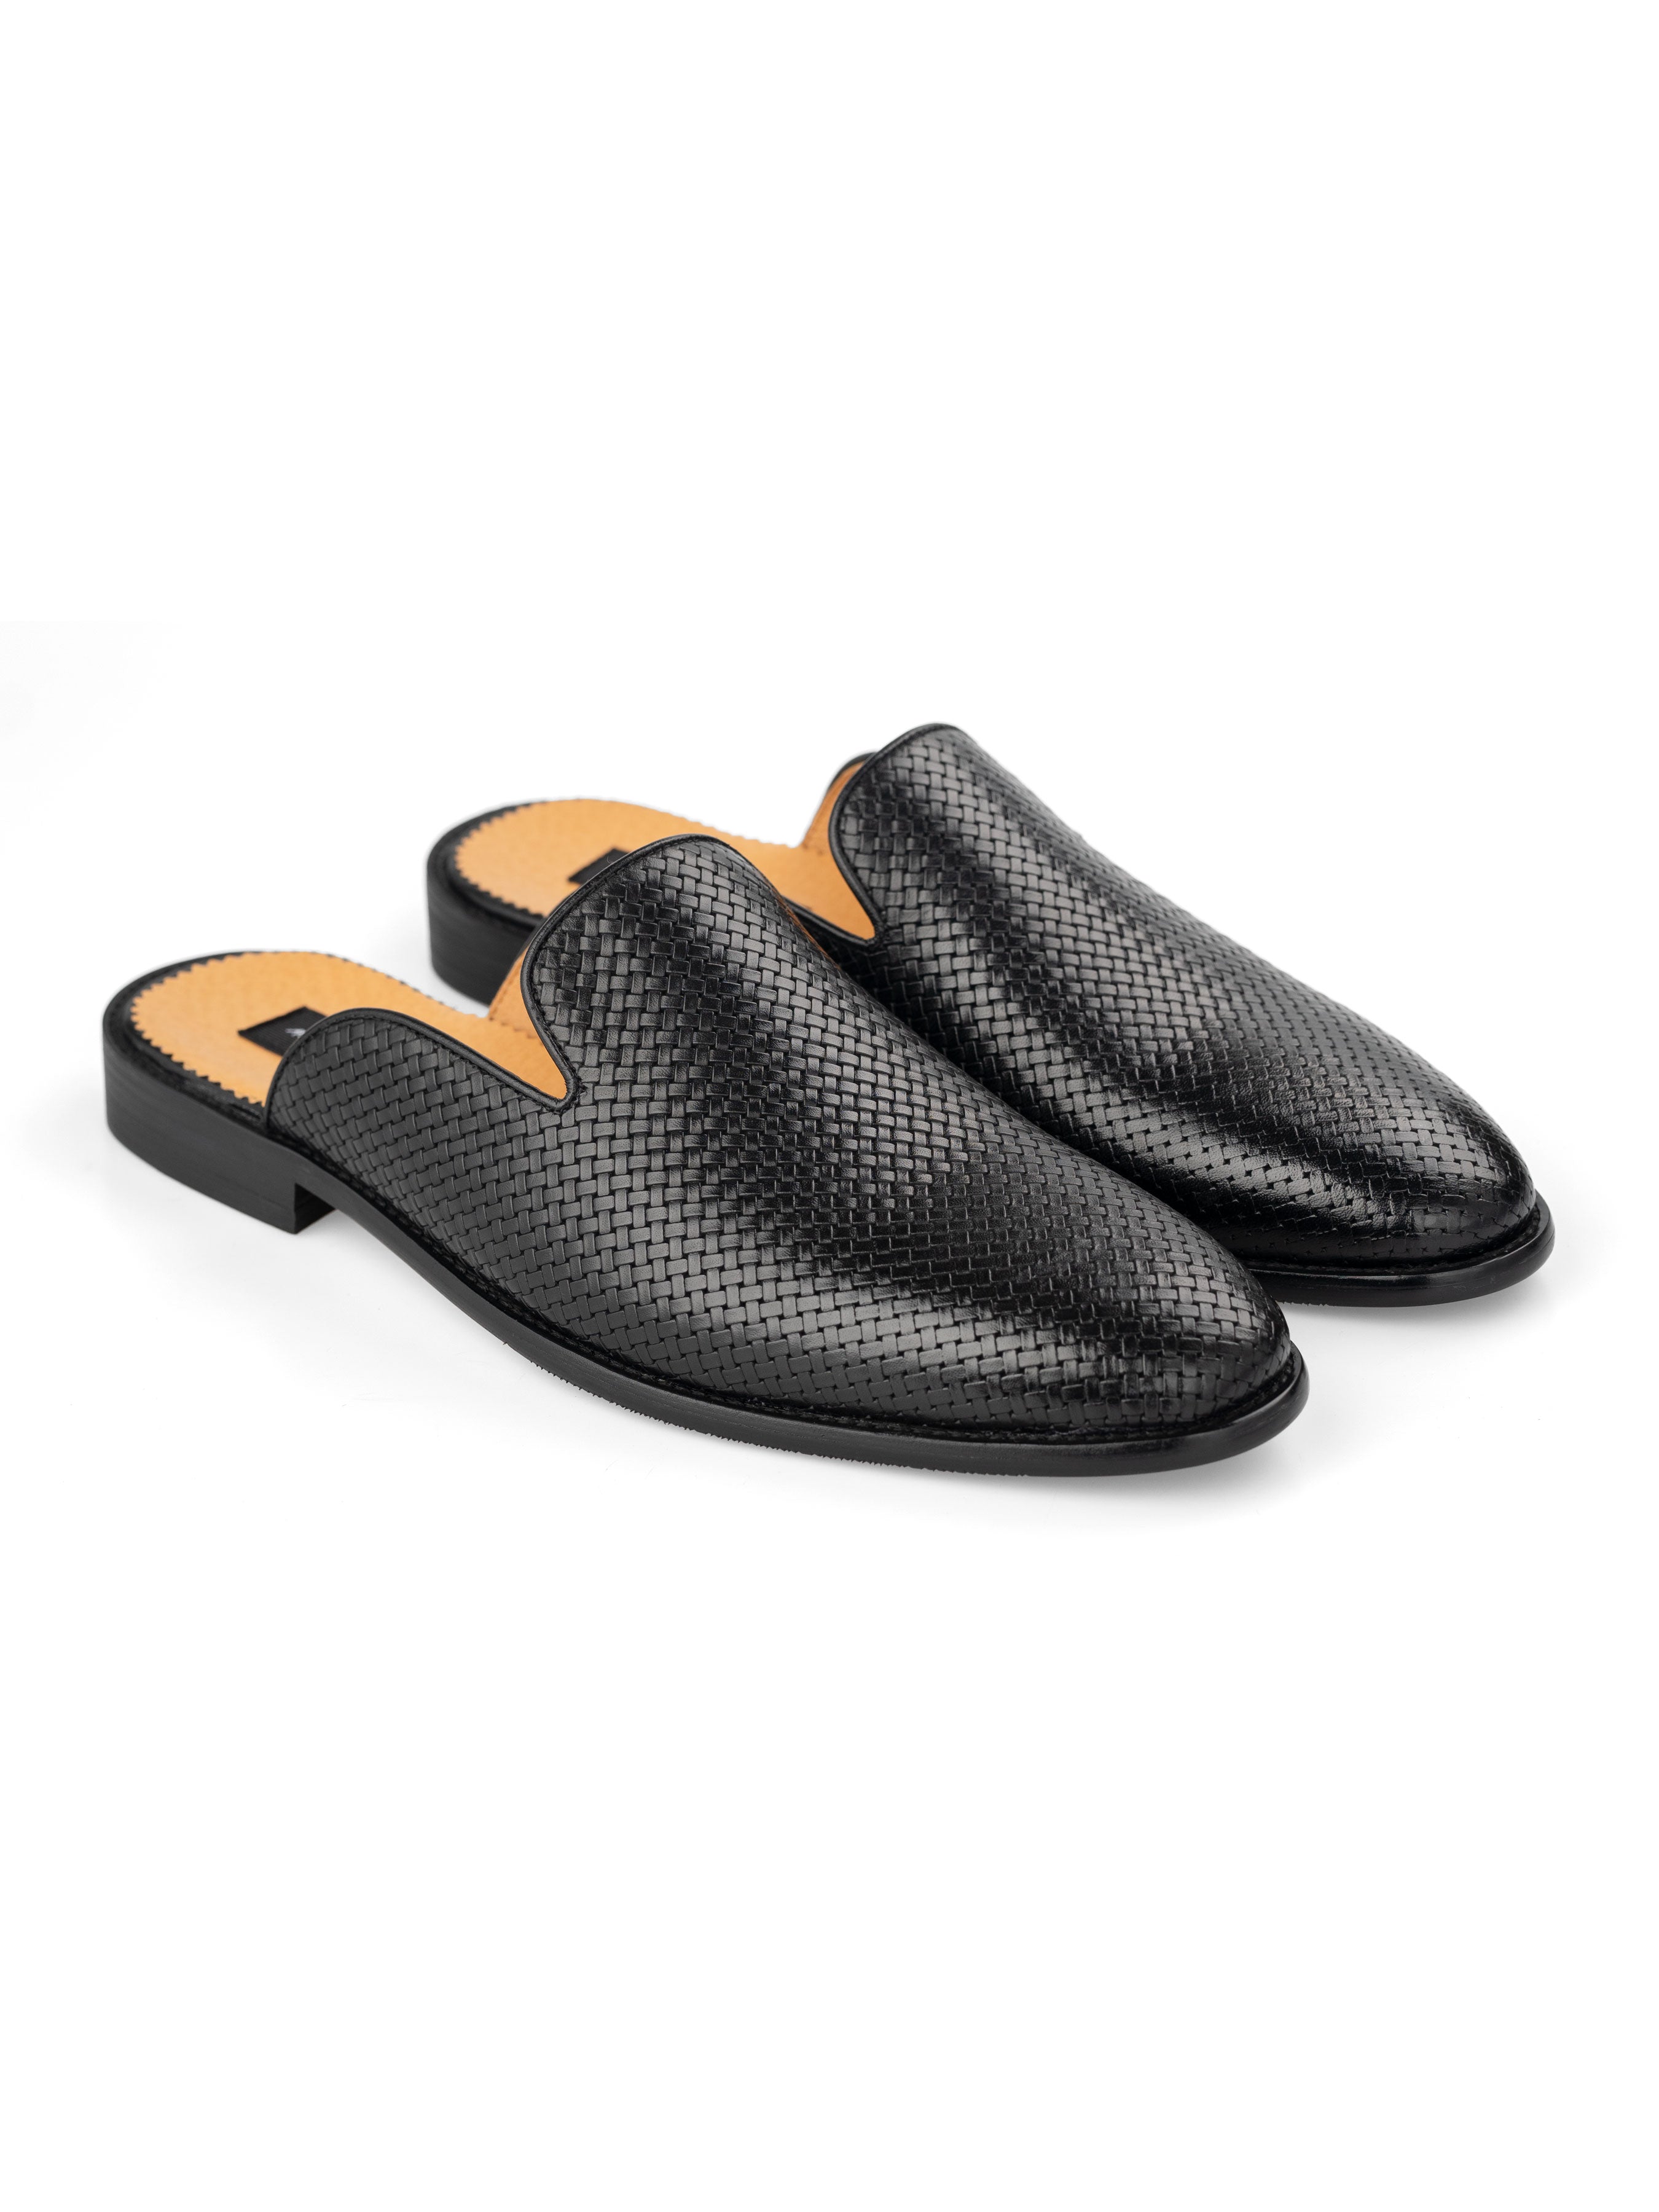 Mules - Black Woven Leather